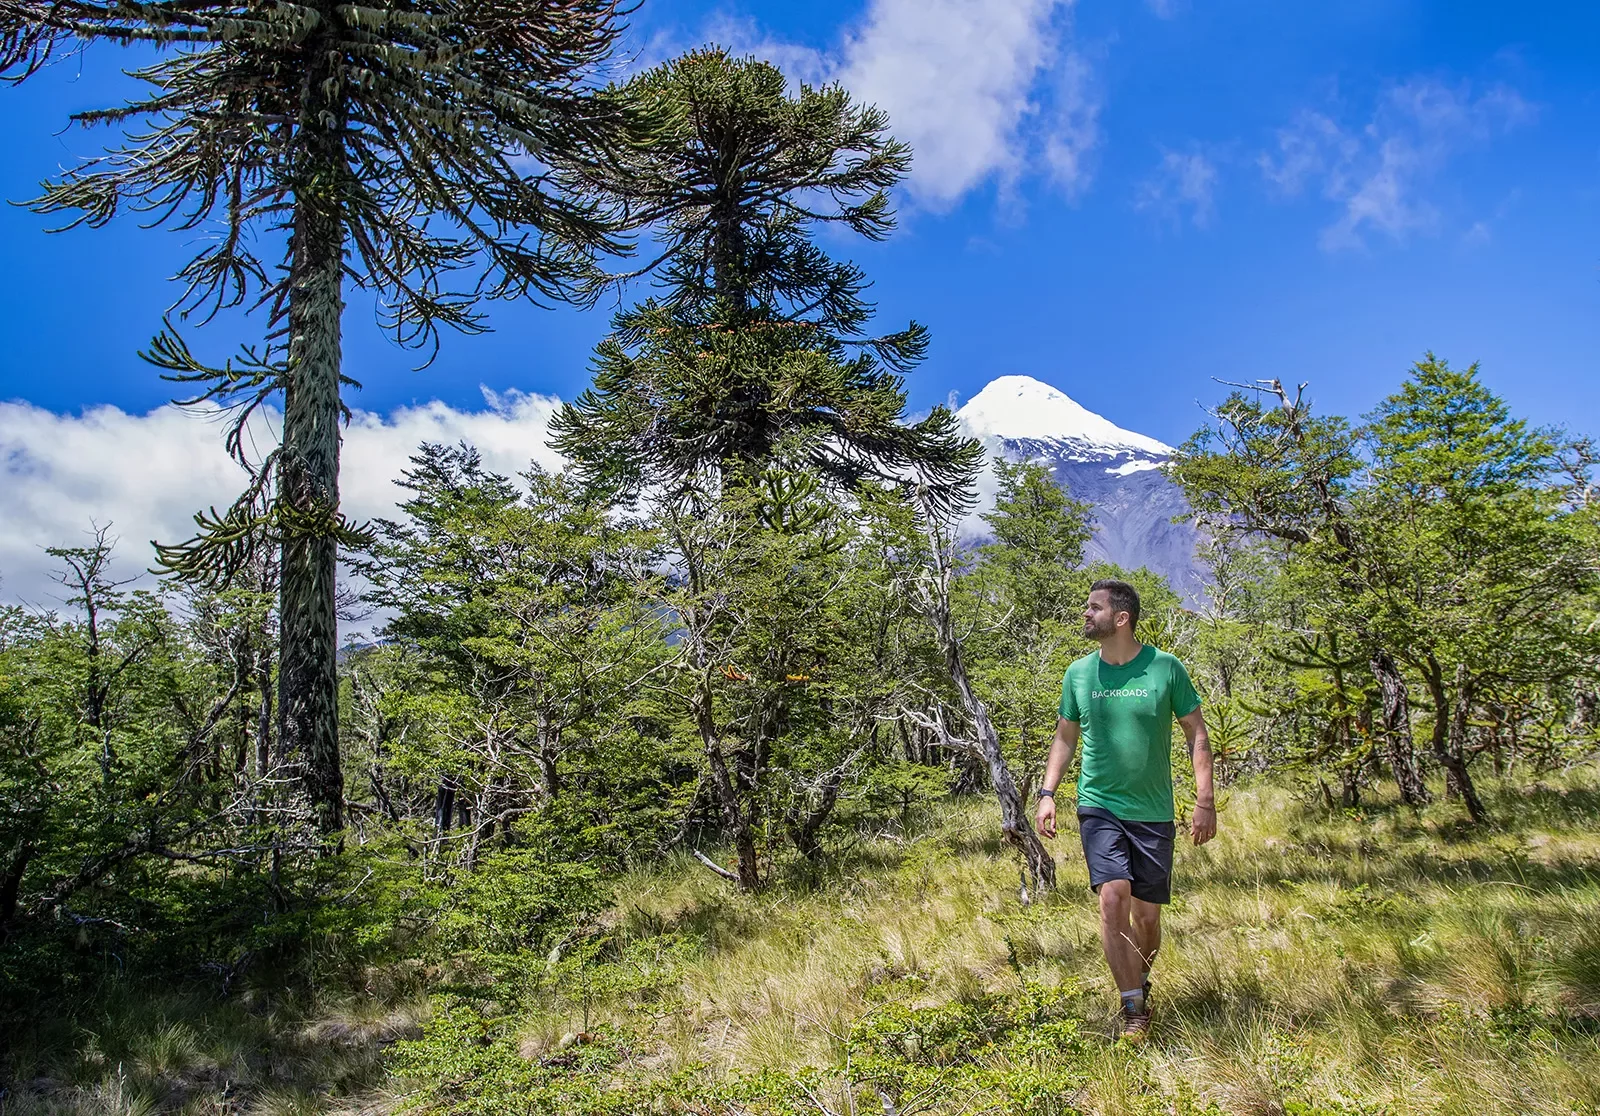 Guest walking through thin-branch forest. Snowy mountain cap in background.